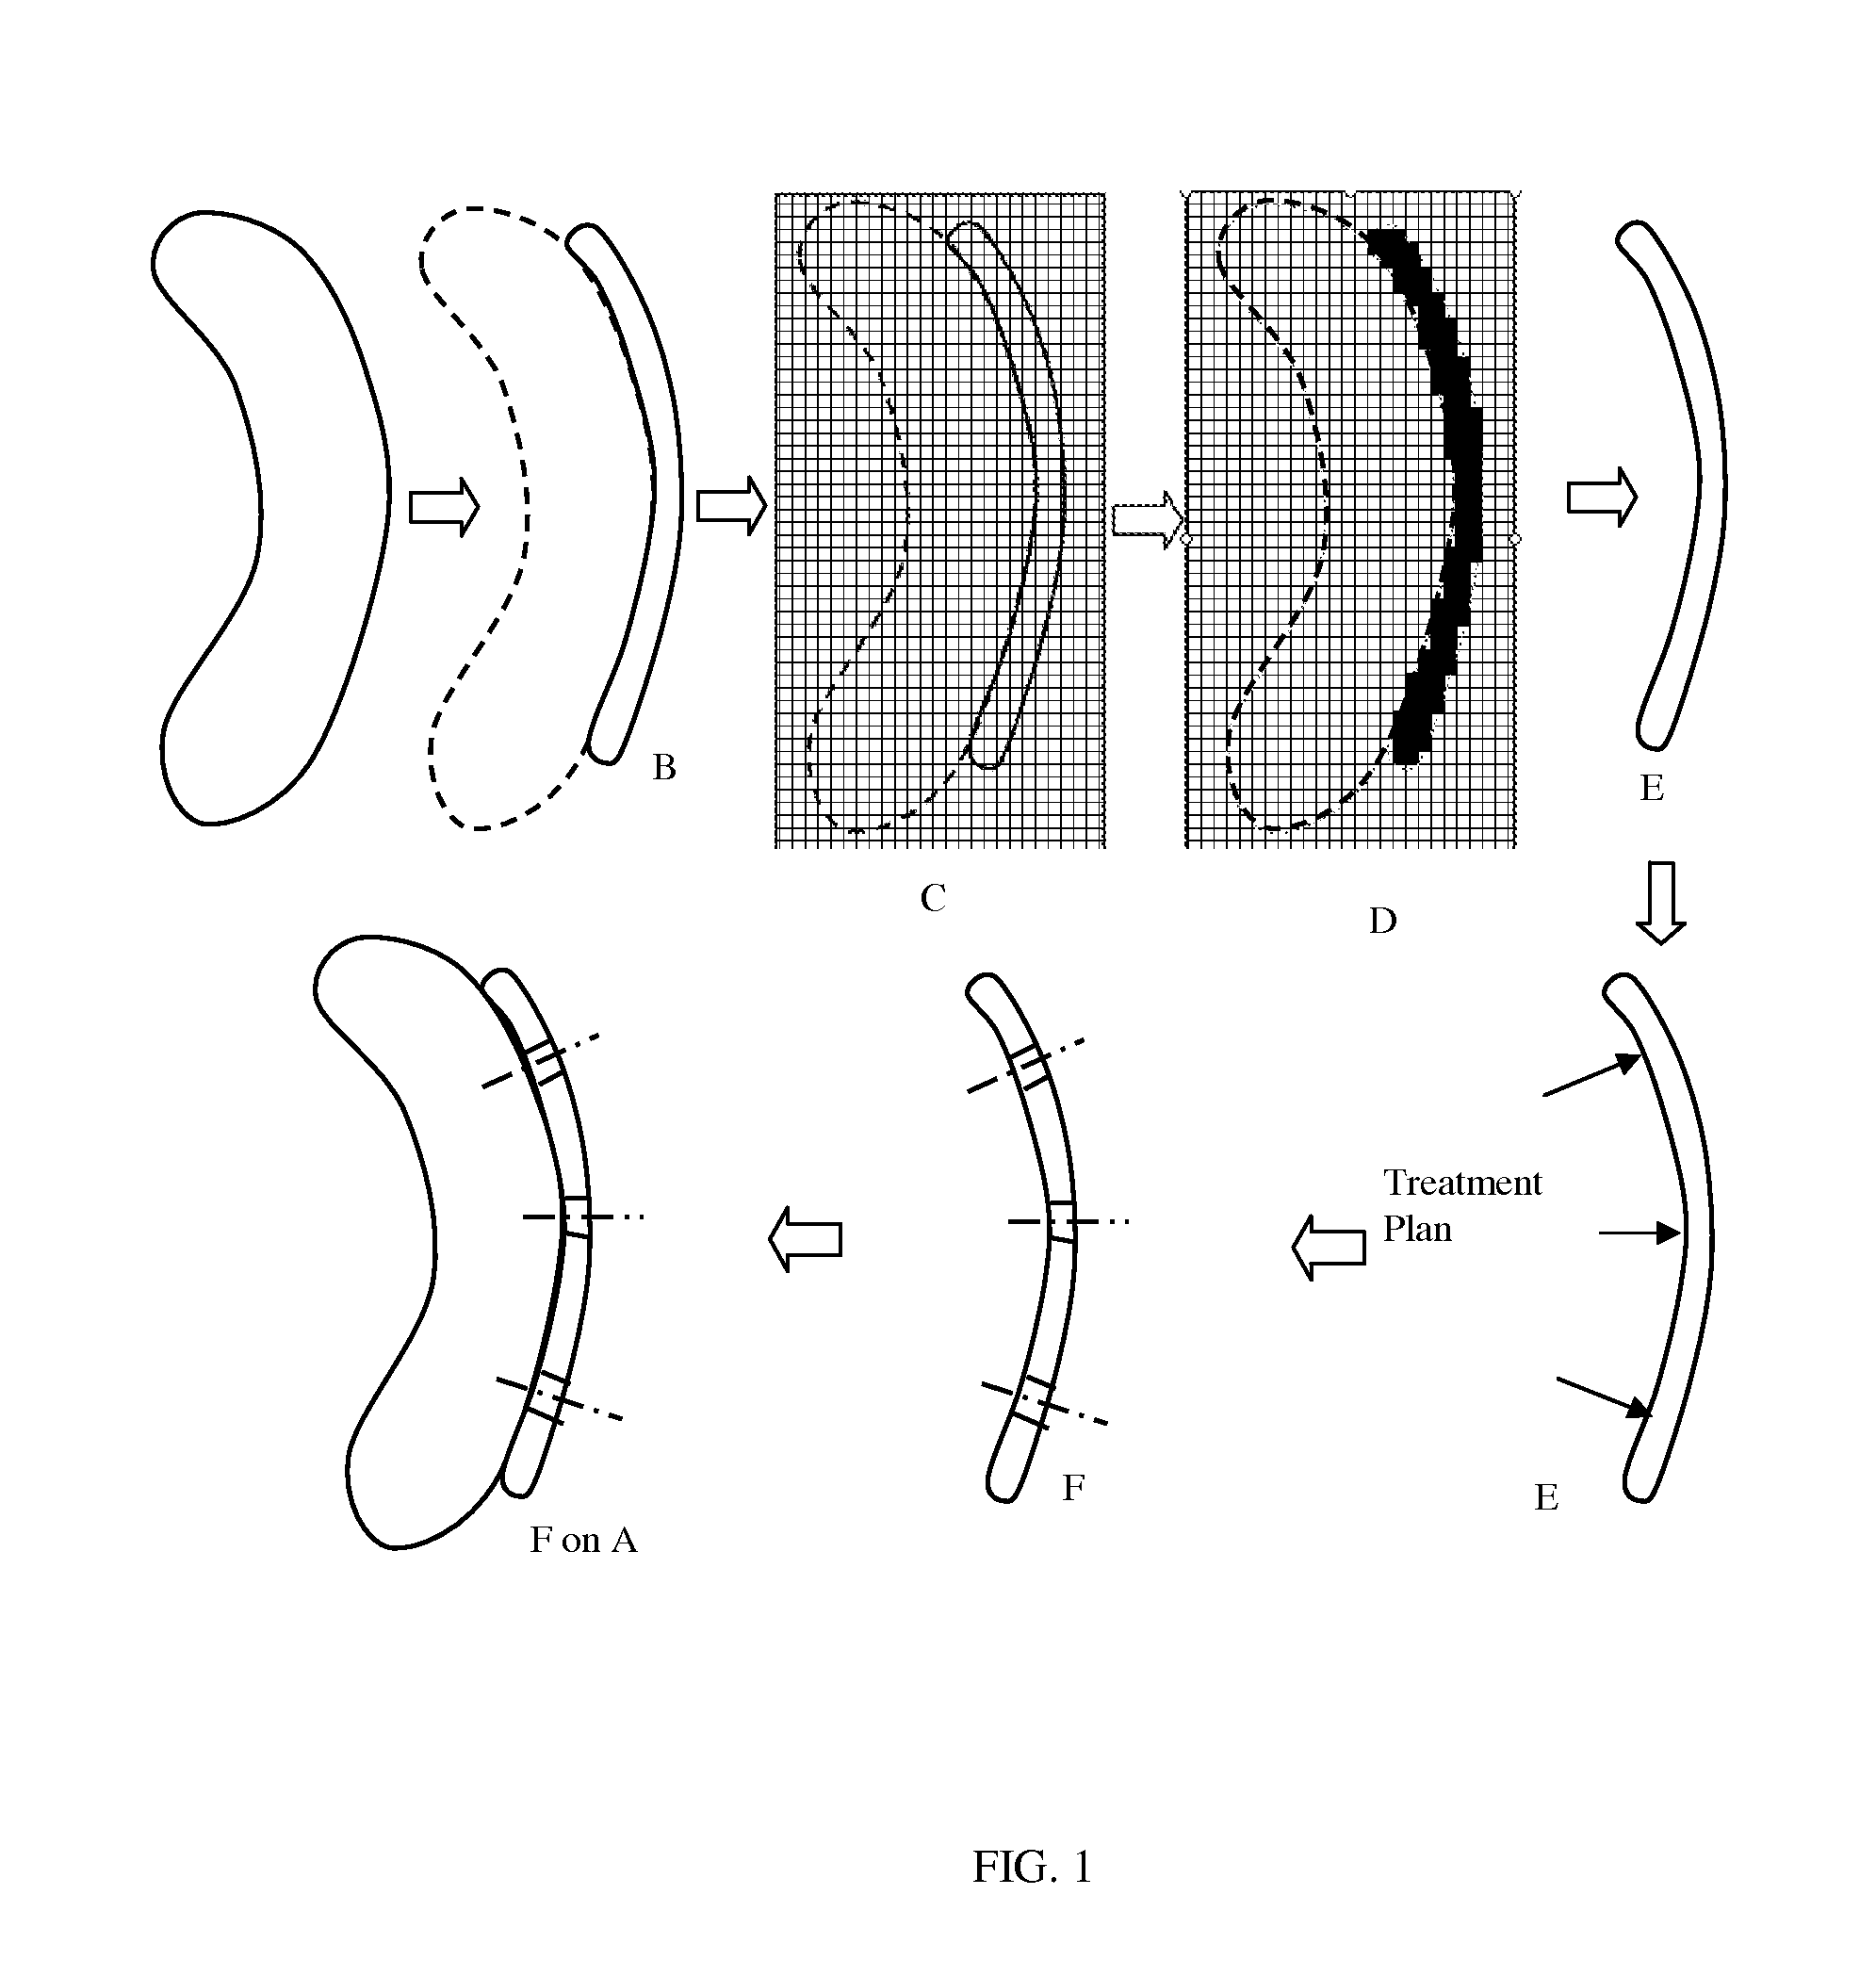 Design method of surgical scan templates and improved treatment planning